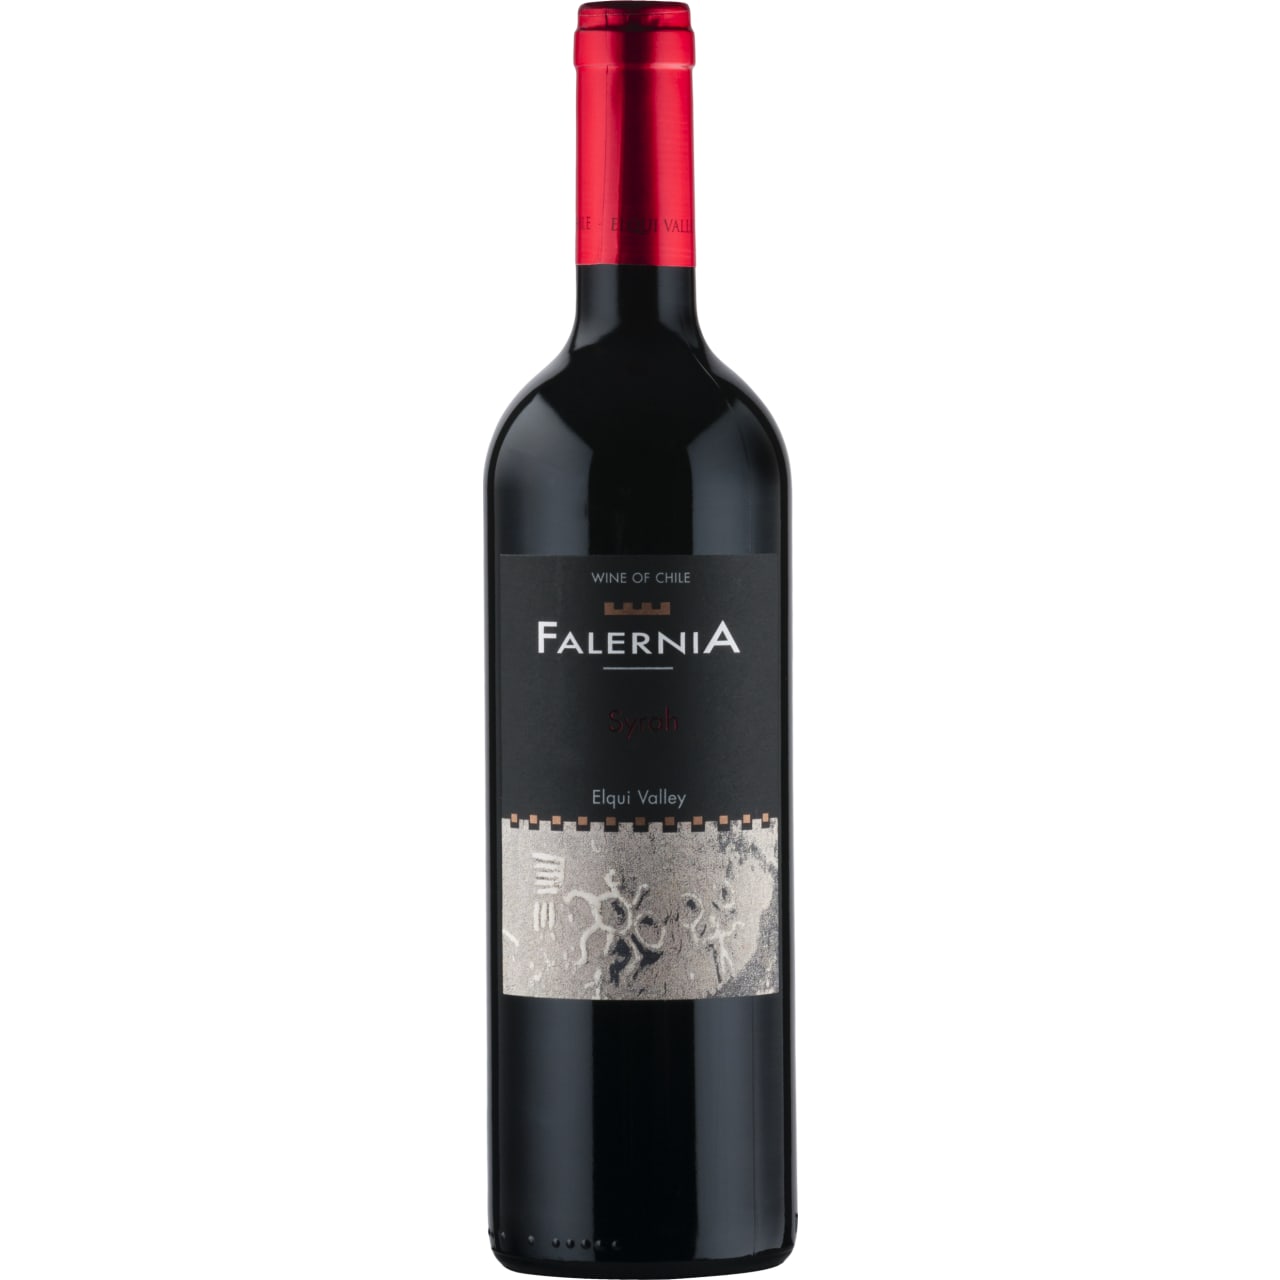 A rich medium-bodied red with a fresh blackcurrant bouquet and flavour.